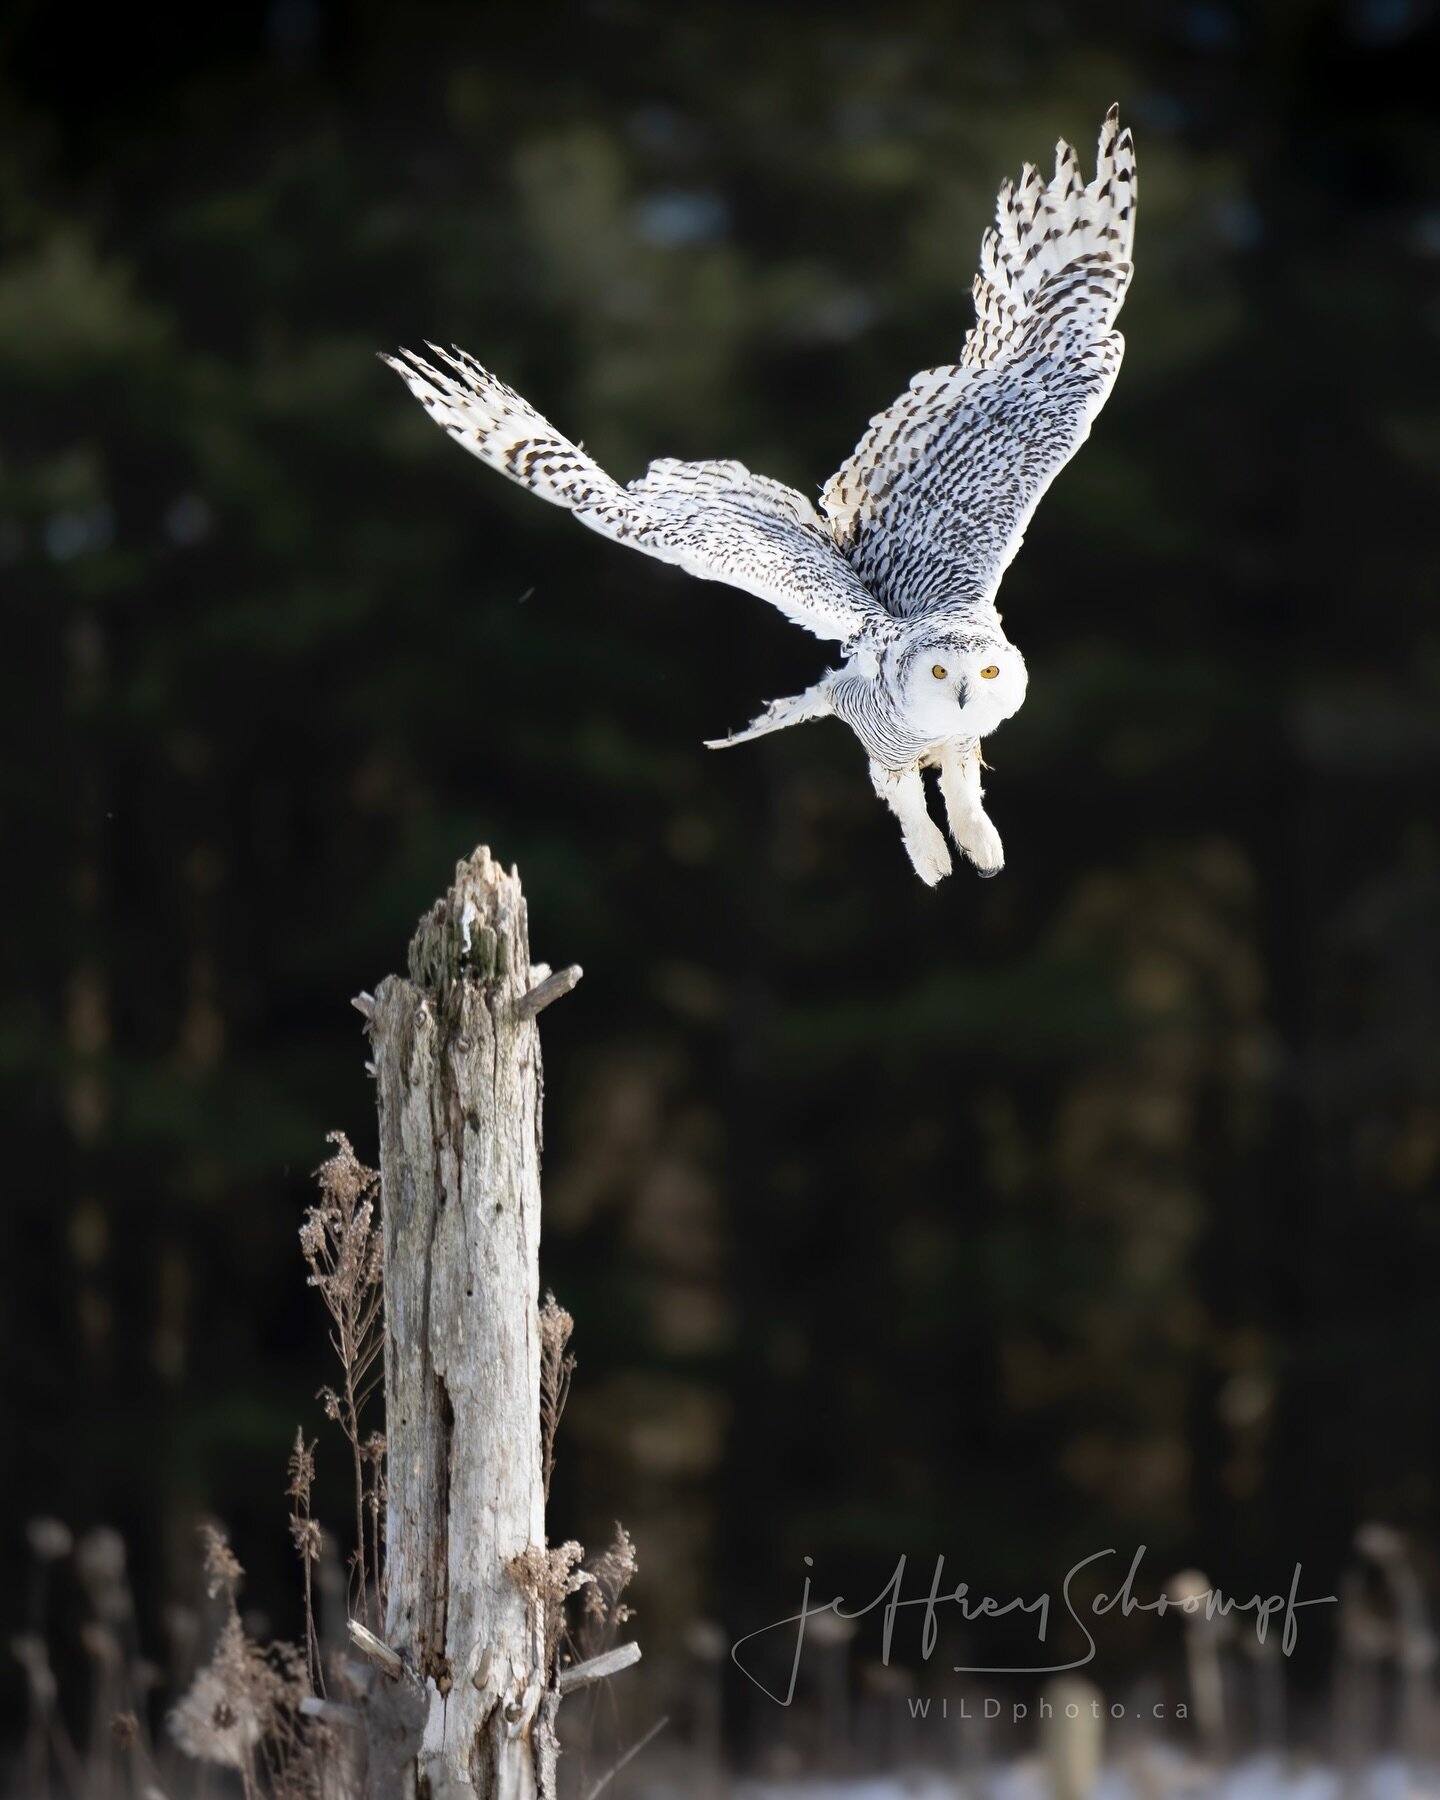 Snowy Owl
The aptly named Snowy Owl is mainly a circumpolar species, which means that individuals live and nest in the far north regions around the North Pole. In the non-breeding season, this species also can be found in areas of southern Canada and